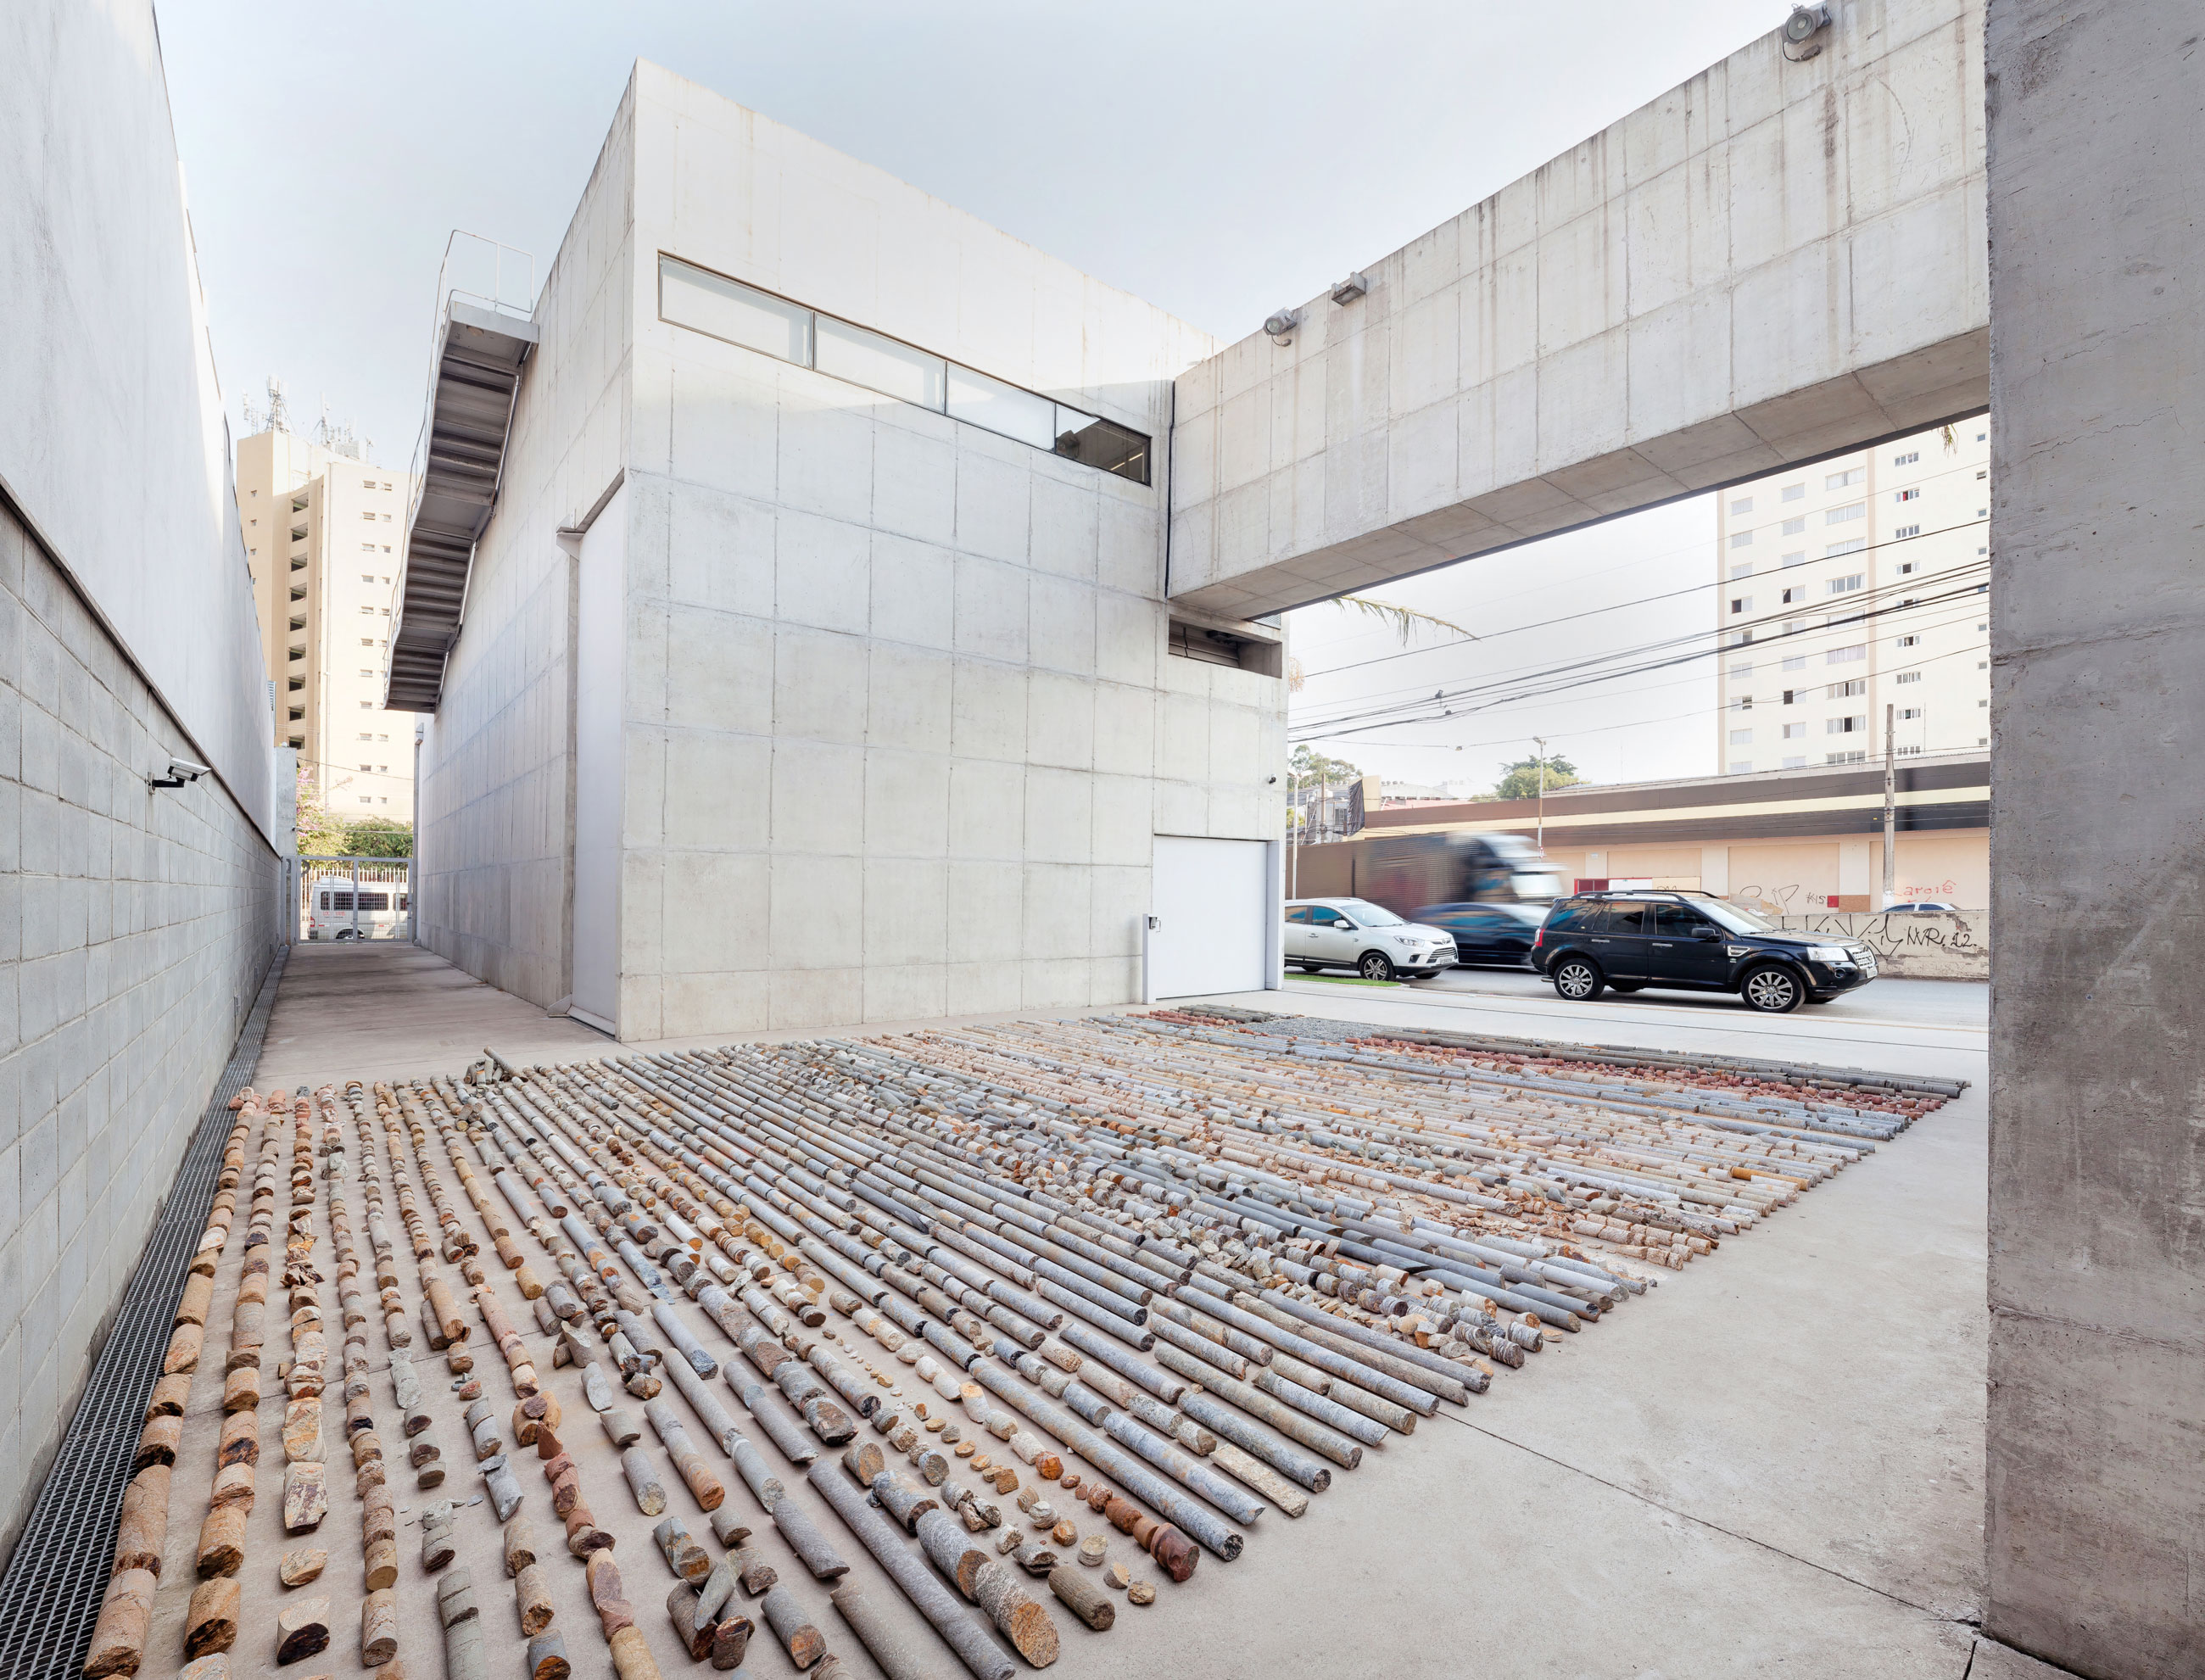 Site-specific Installation titled testemunho by artist Daniel de Paula, consisting of rock core samples, earth and diagram, curated by Bruno Alves de Almeida for the project SITU at Galeria Leme, São Paulo, Brazil.